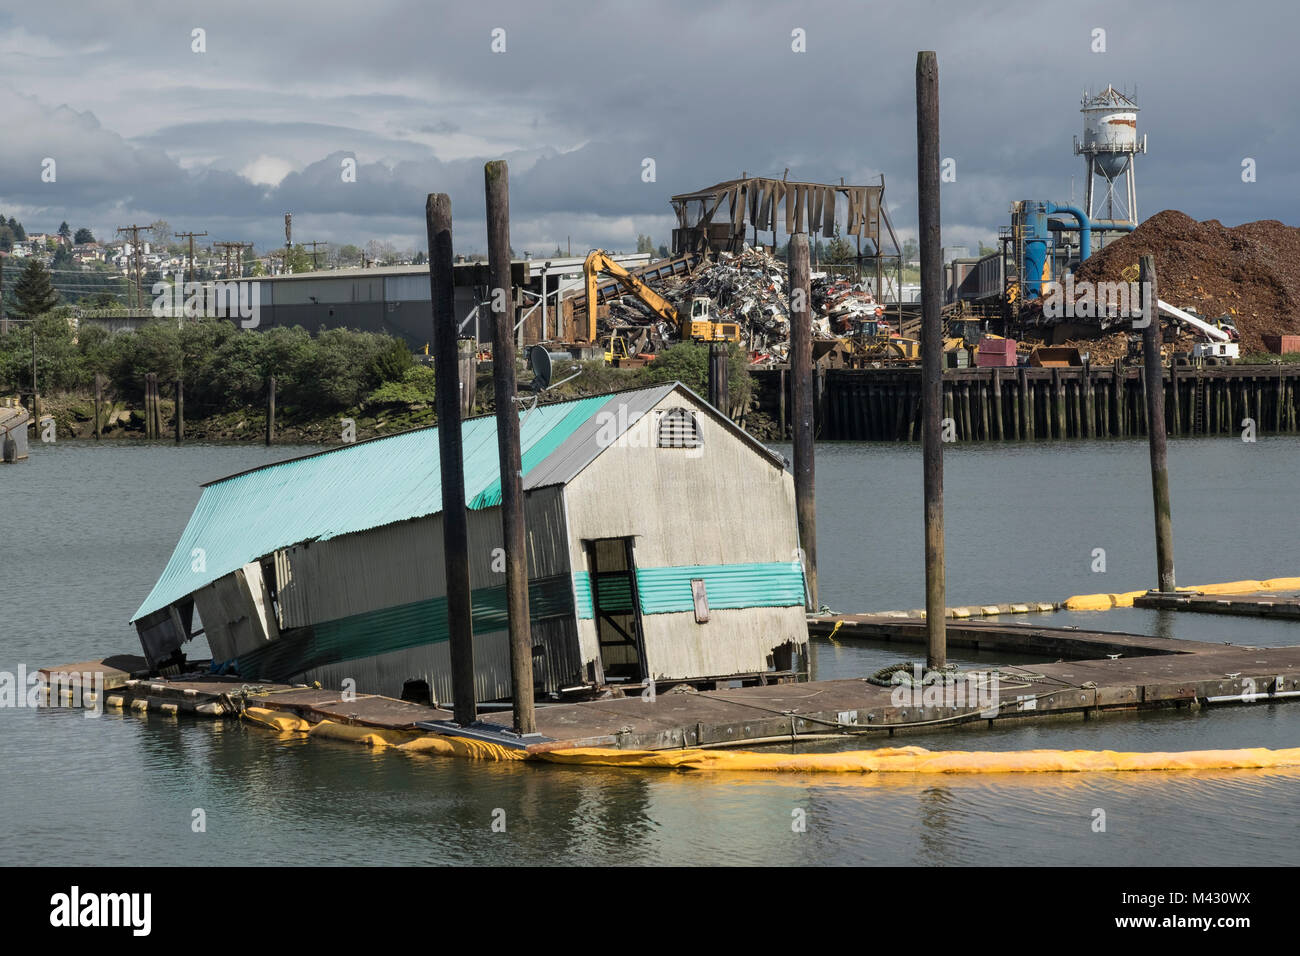 A derelict shed for a boat on the Duwamish River, Seattle, Washington Stock Photo